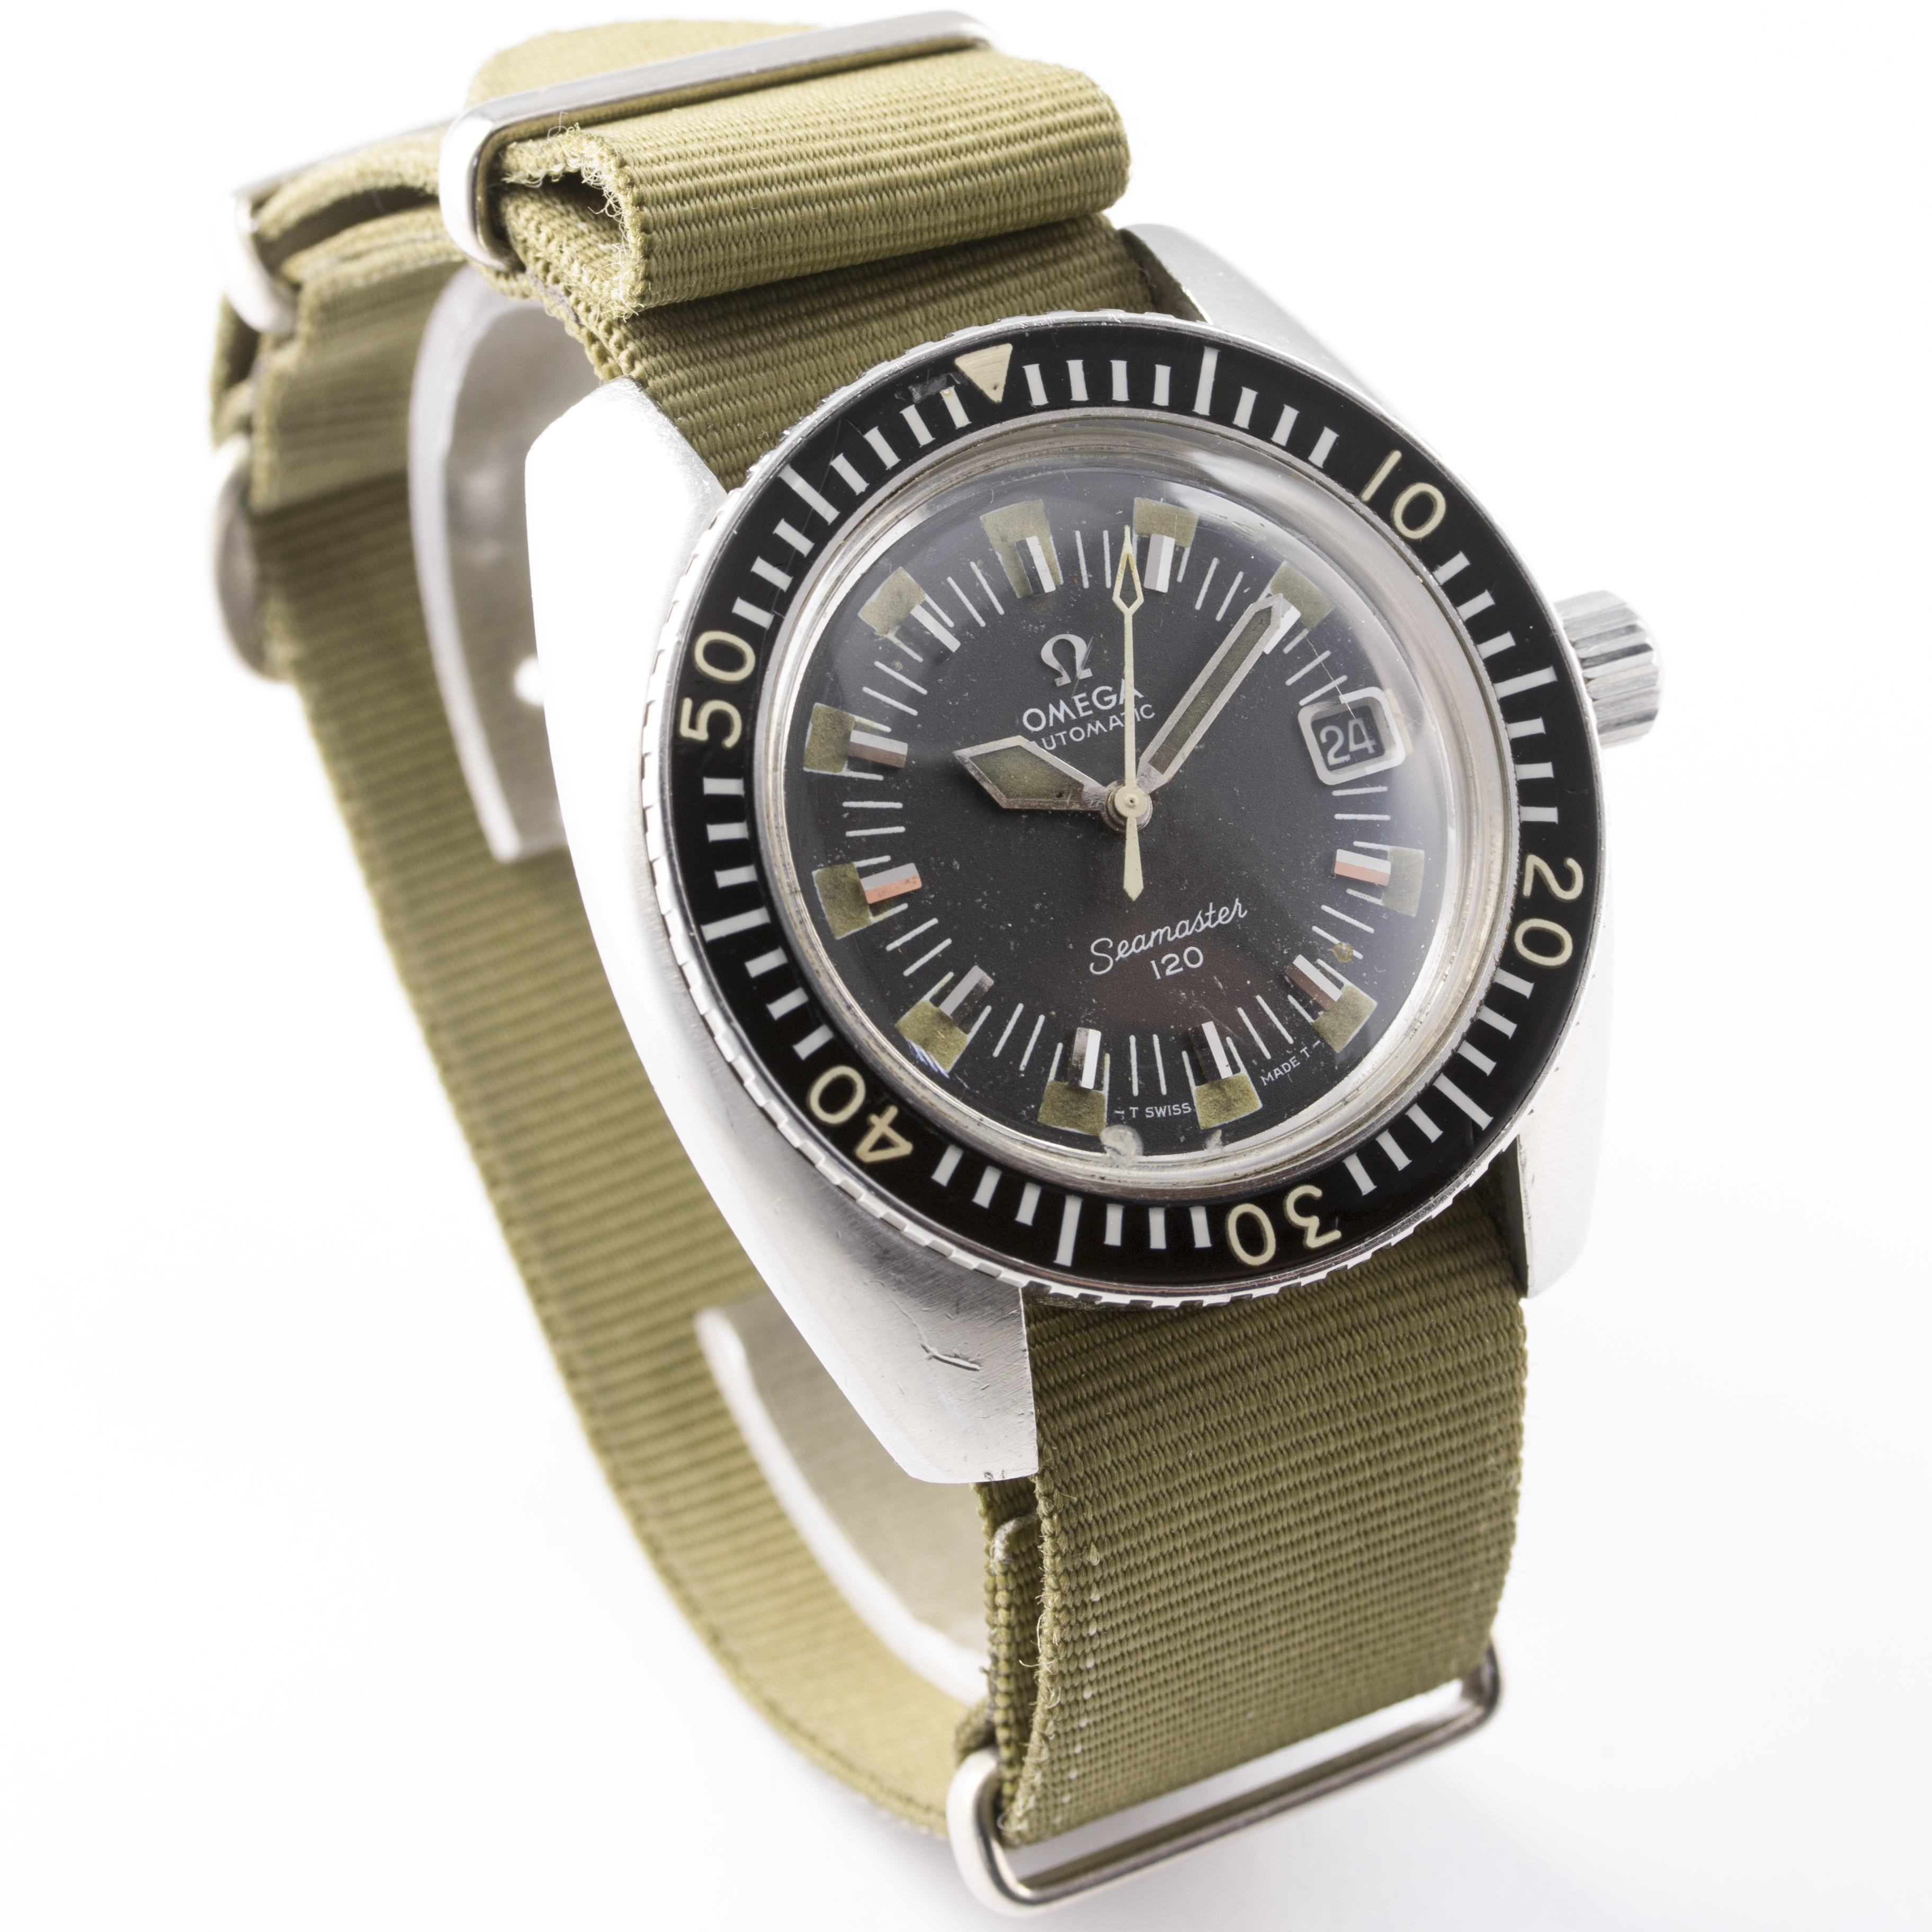 A GENTLEMAN’S STAINLESS STEEL OMEGA SEAMASTER 120 AUTOMATIC WRIST WATCH
CIRCA 1972, REF. 166.073 - Image 5 of 7